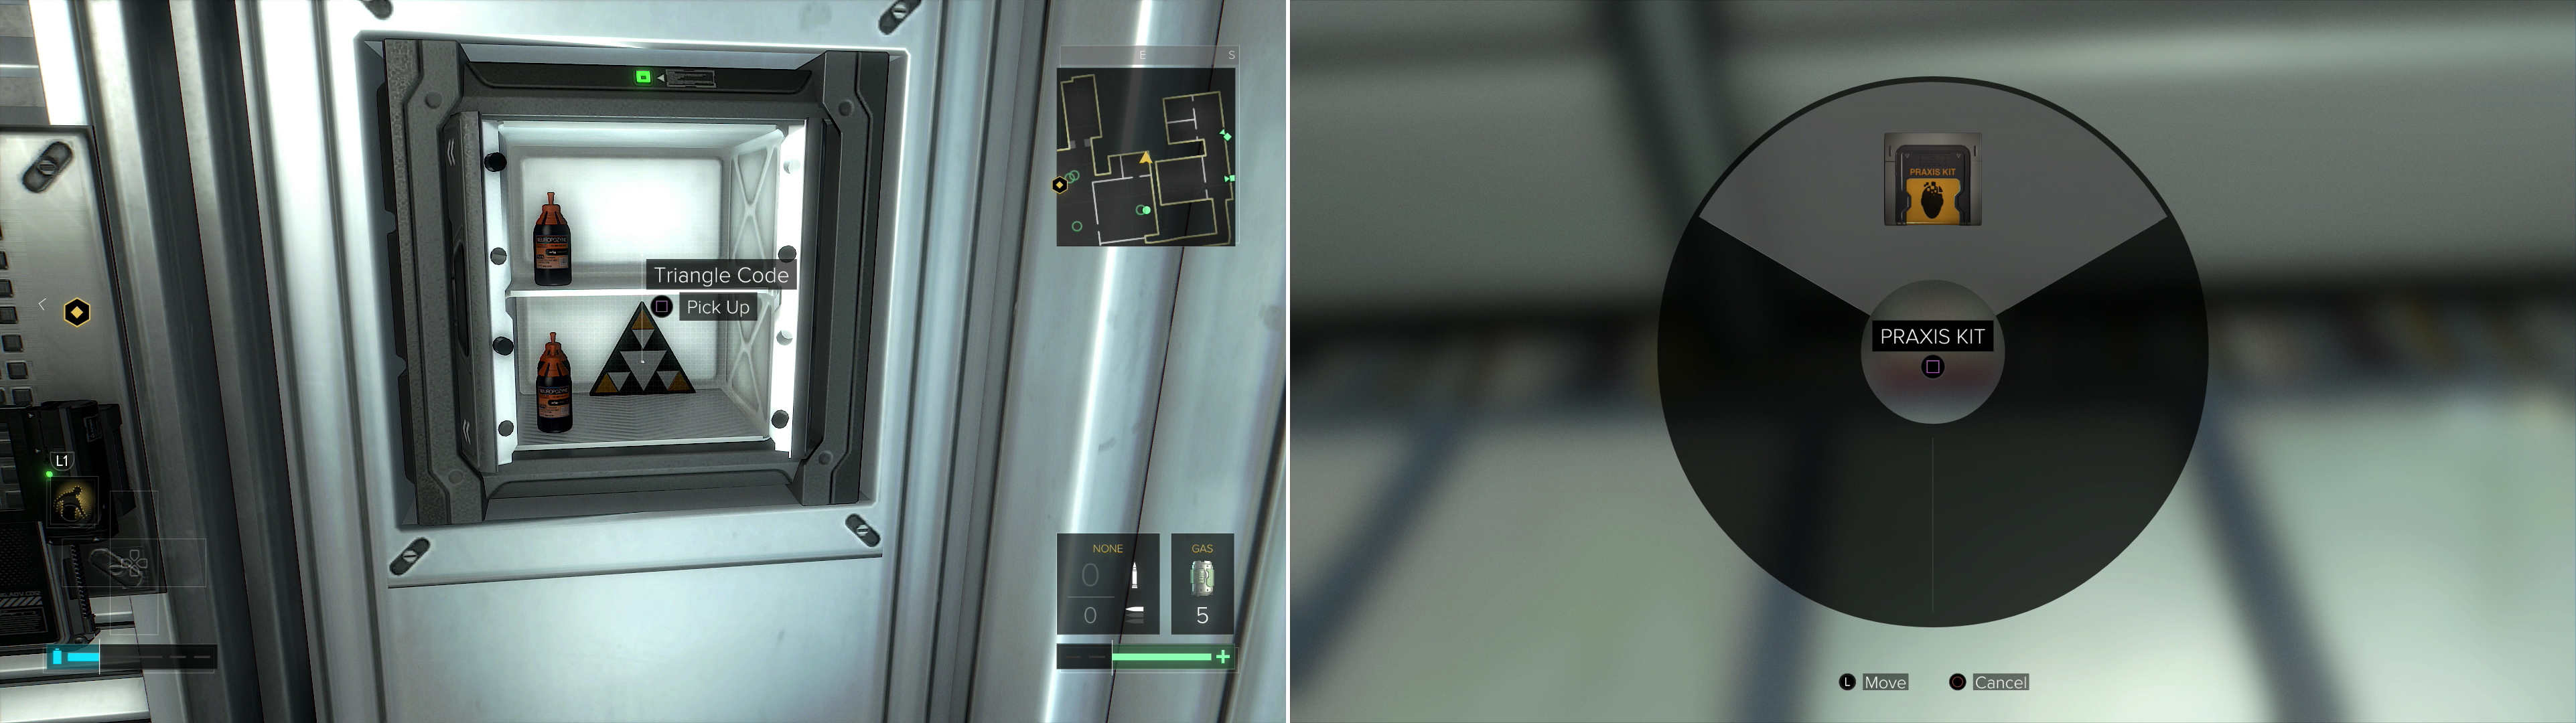 In TF29's Infirmary you can open a safe to find goodies, including Neuropozyne and Triangle Code #9 (left). You can also search a Medical Box on top of a cabinet to find a Praxis Kit (right).